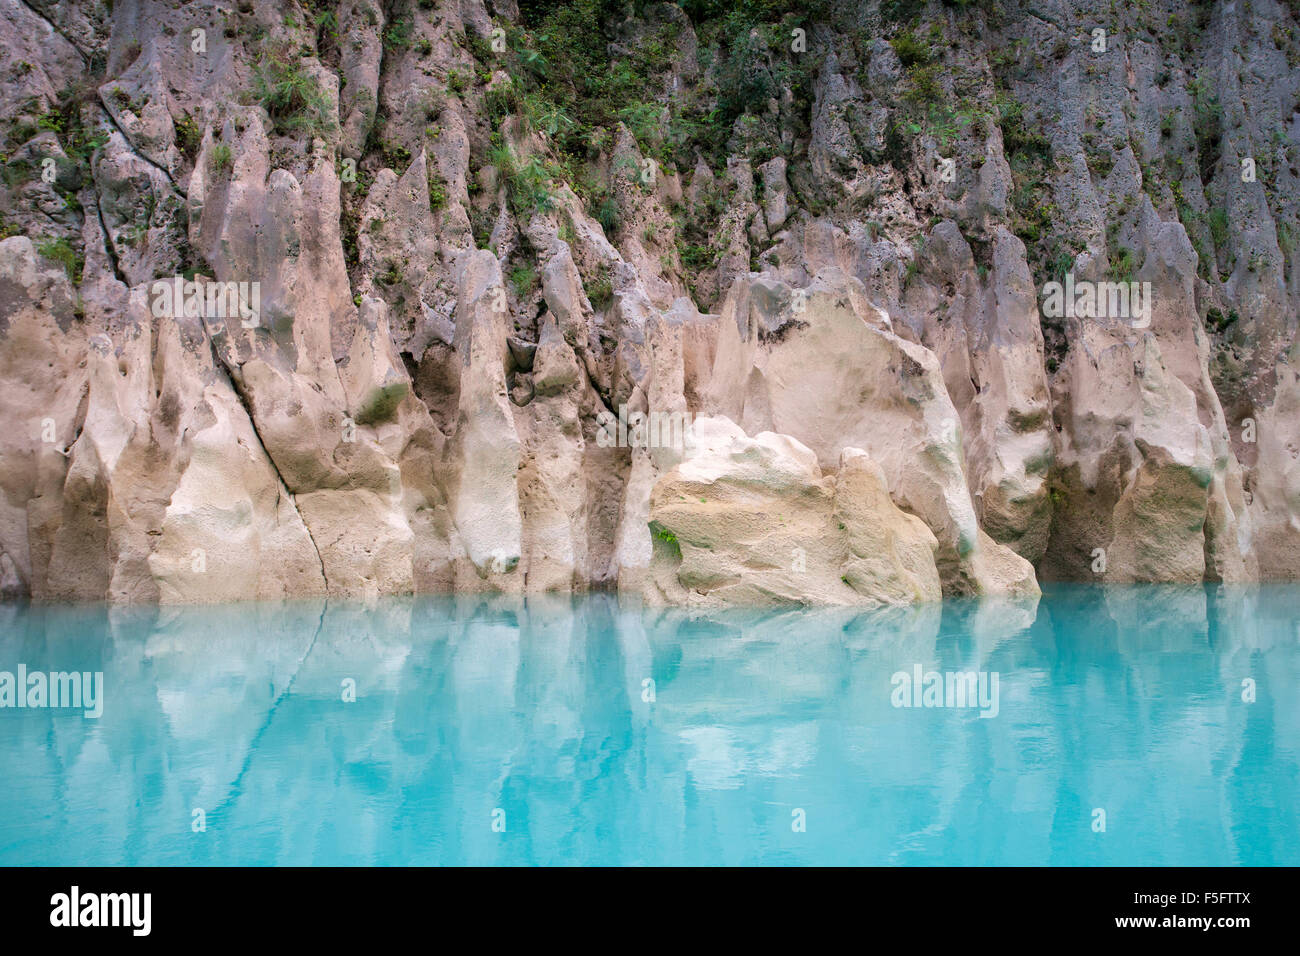 Turquoise color of the Tampaon River contrasts with rock formations in the Huasteca Potosina near Tamul Waterfalls, San Luis Pot Stock Photo